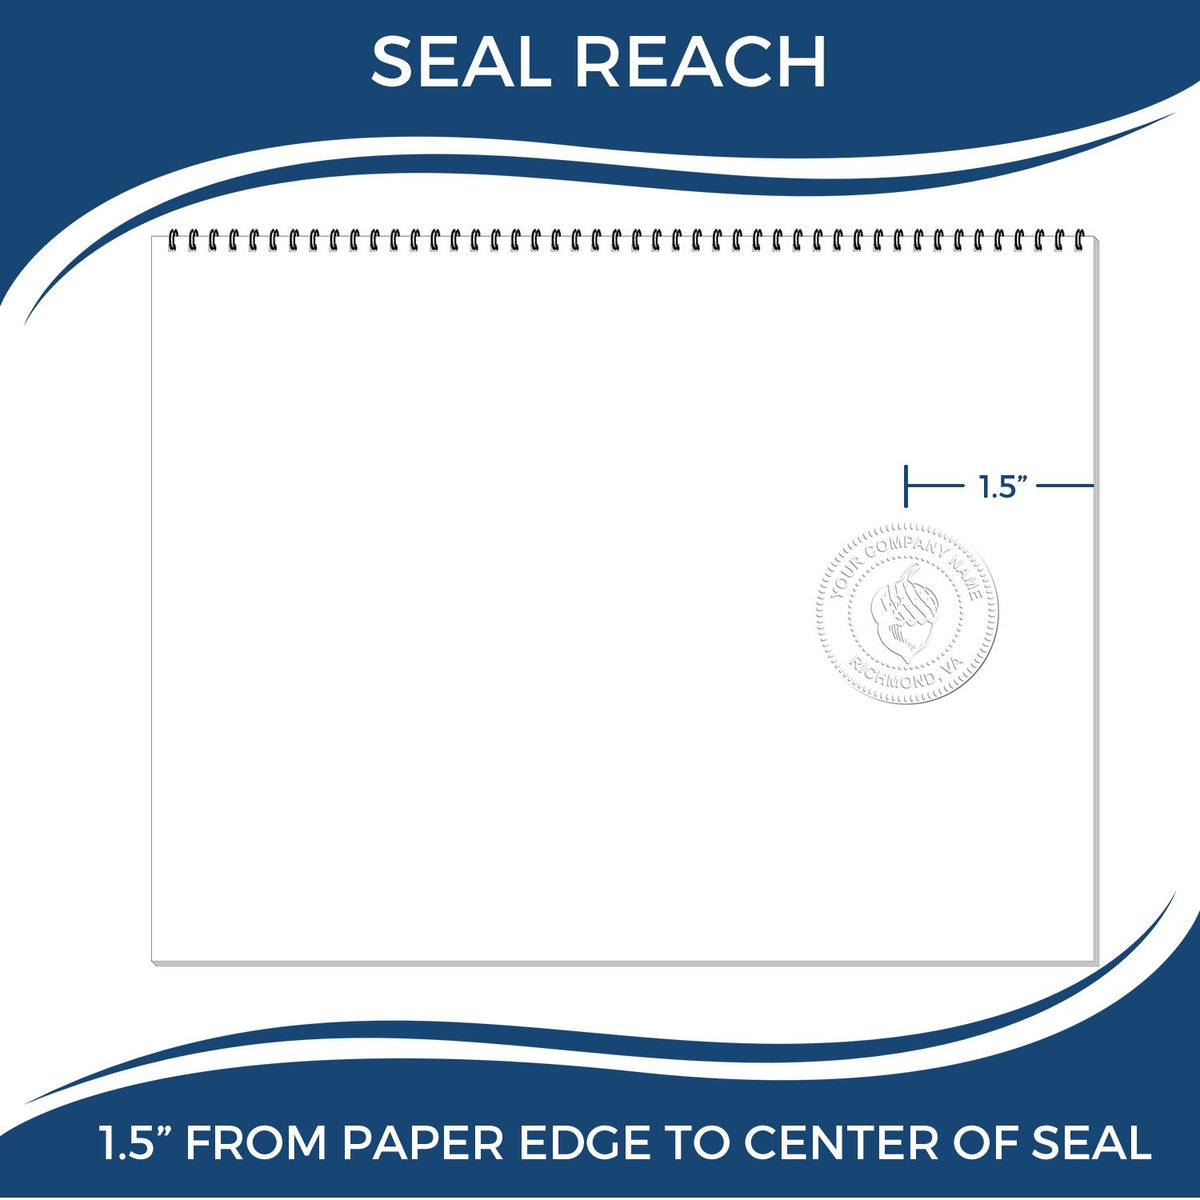 An infographic showing the seal reach which is represented by a ruler and a miniature seal image of the Maine Geologist Desk Seal